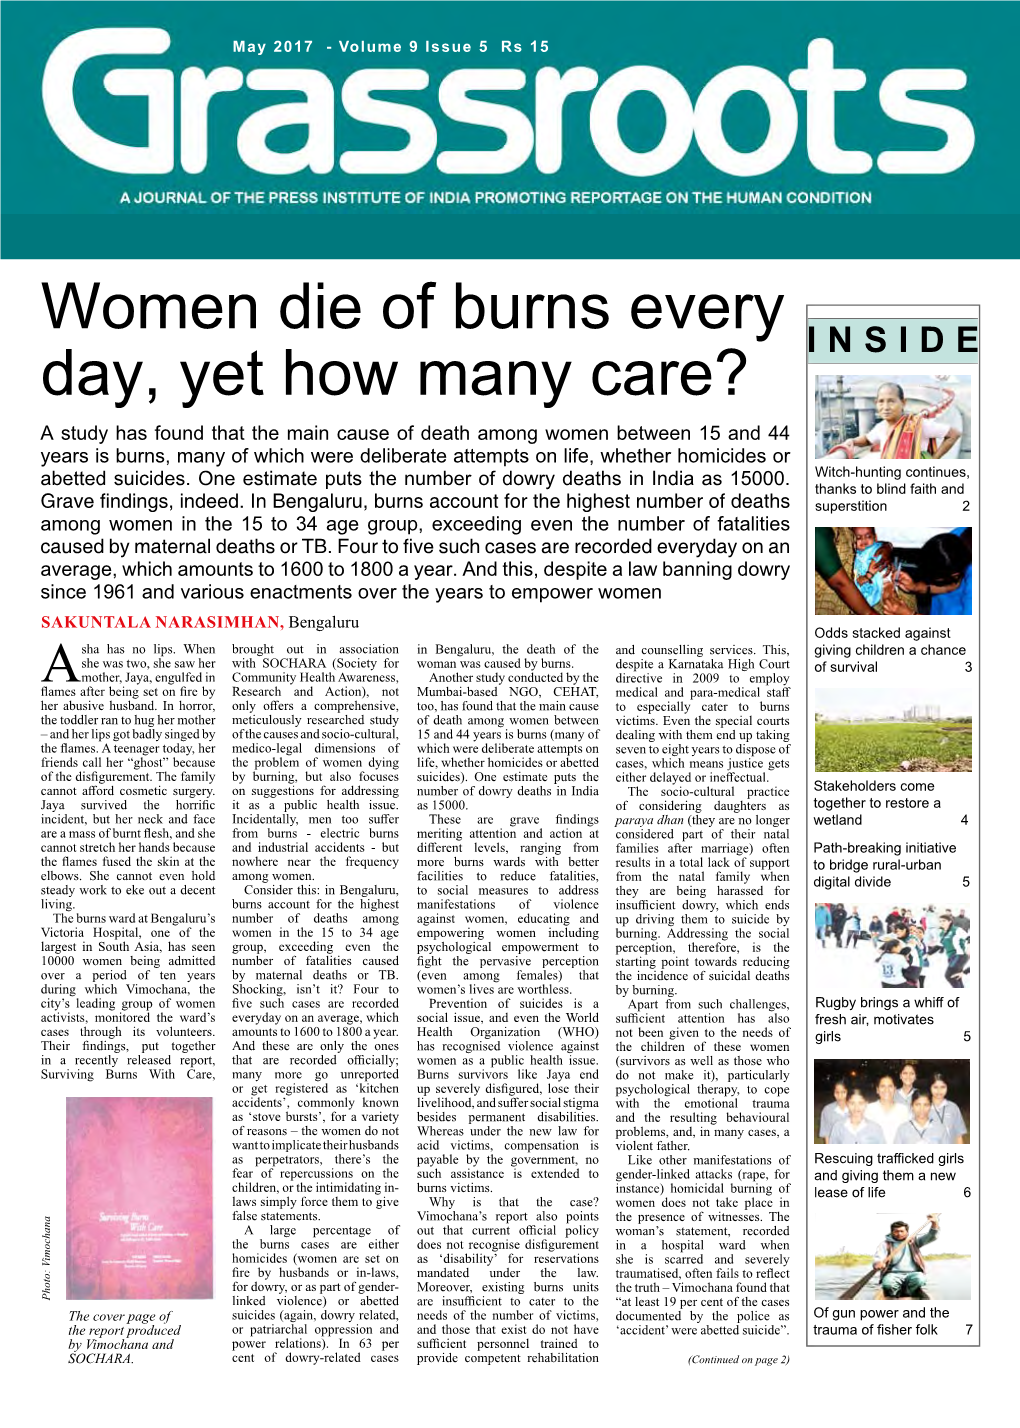 Women Die of Burns Every Day, Yet How Many Care?